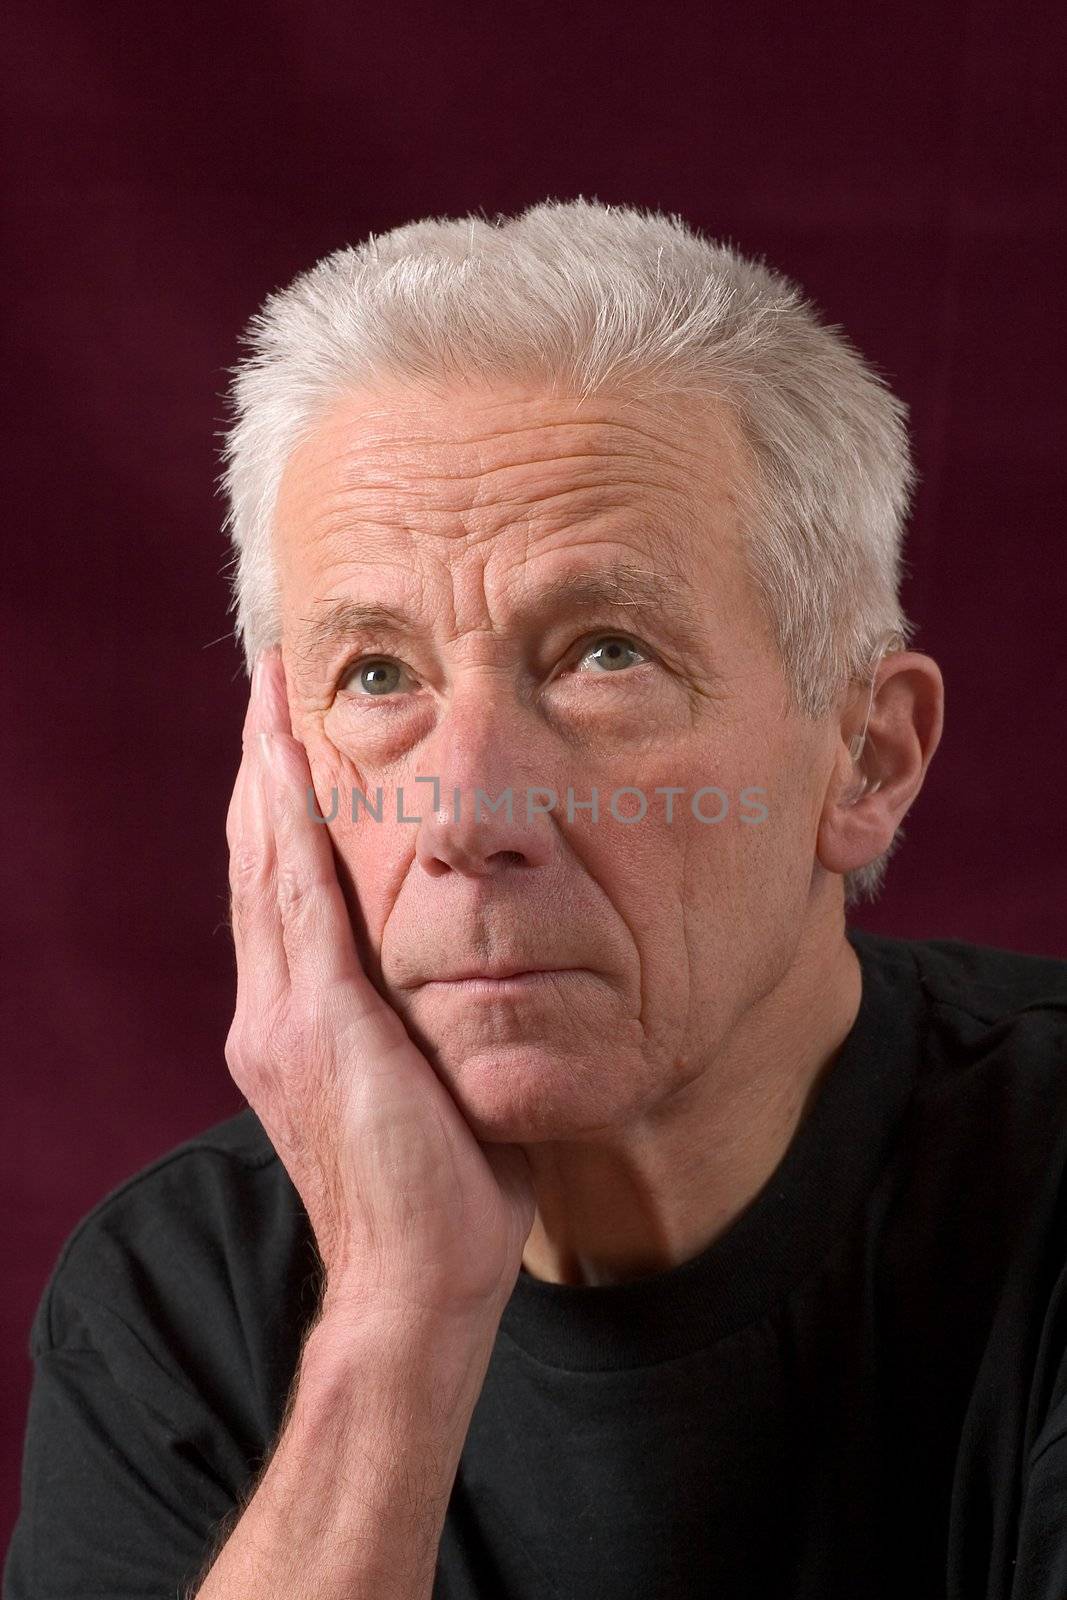 Handsome older man casually dressed, leaning on his hand